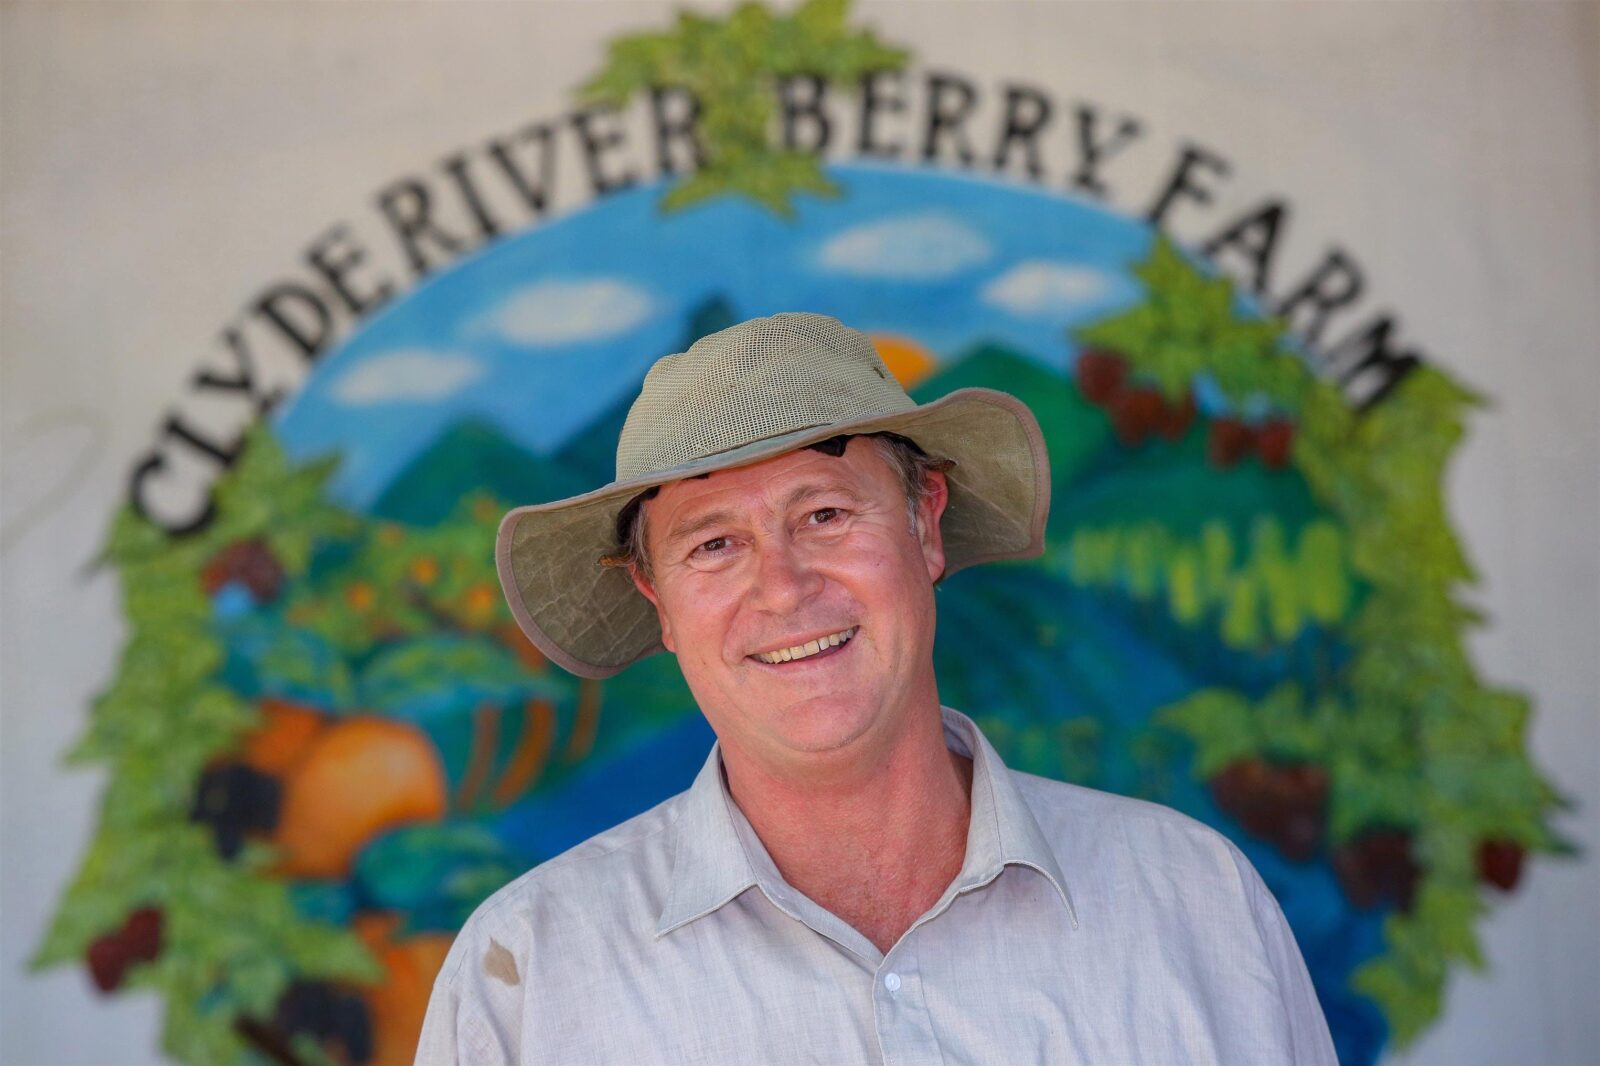 Allan from Clyde River Berry Farm